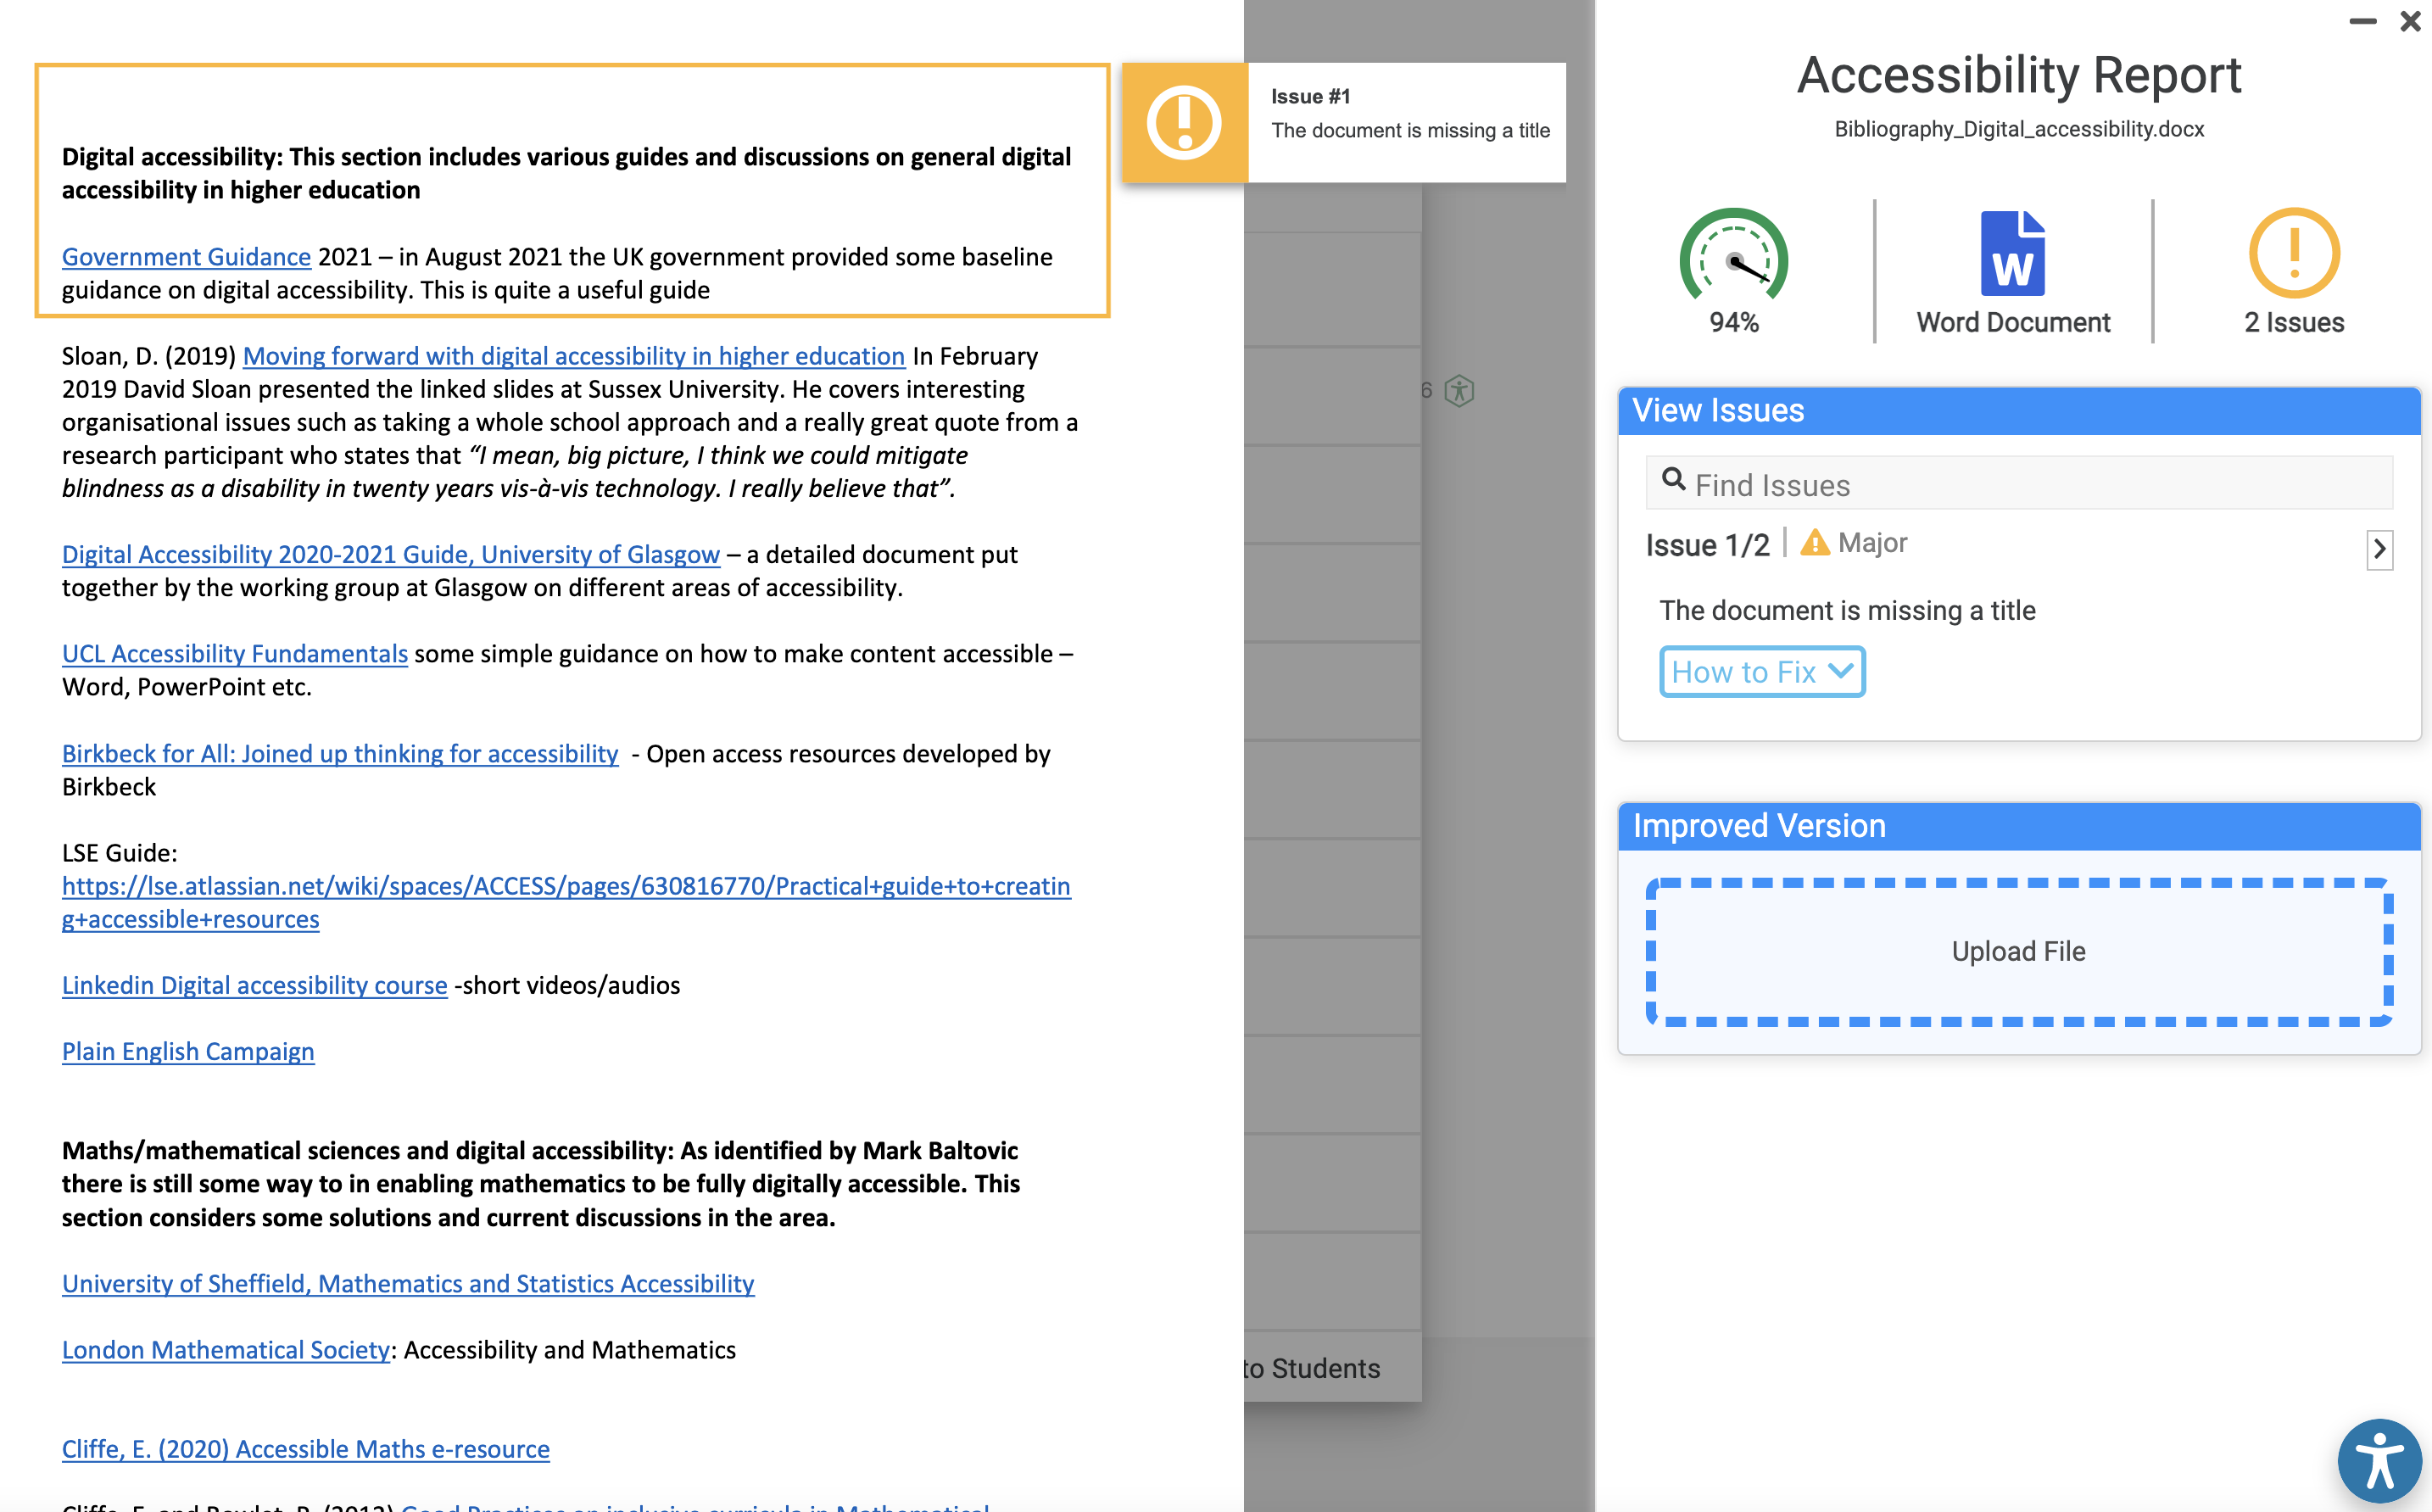 Screen shot of an Accessibility Report on a Word Document uploaded to a Moodle course.